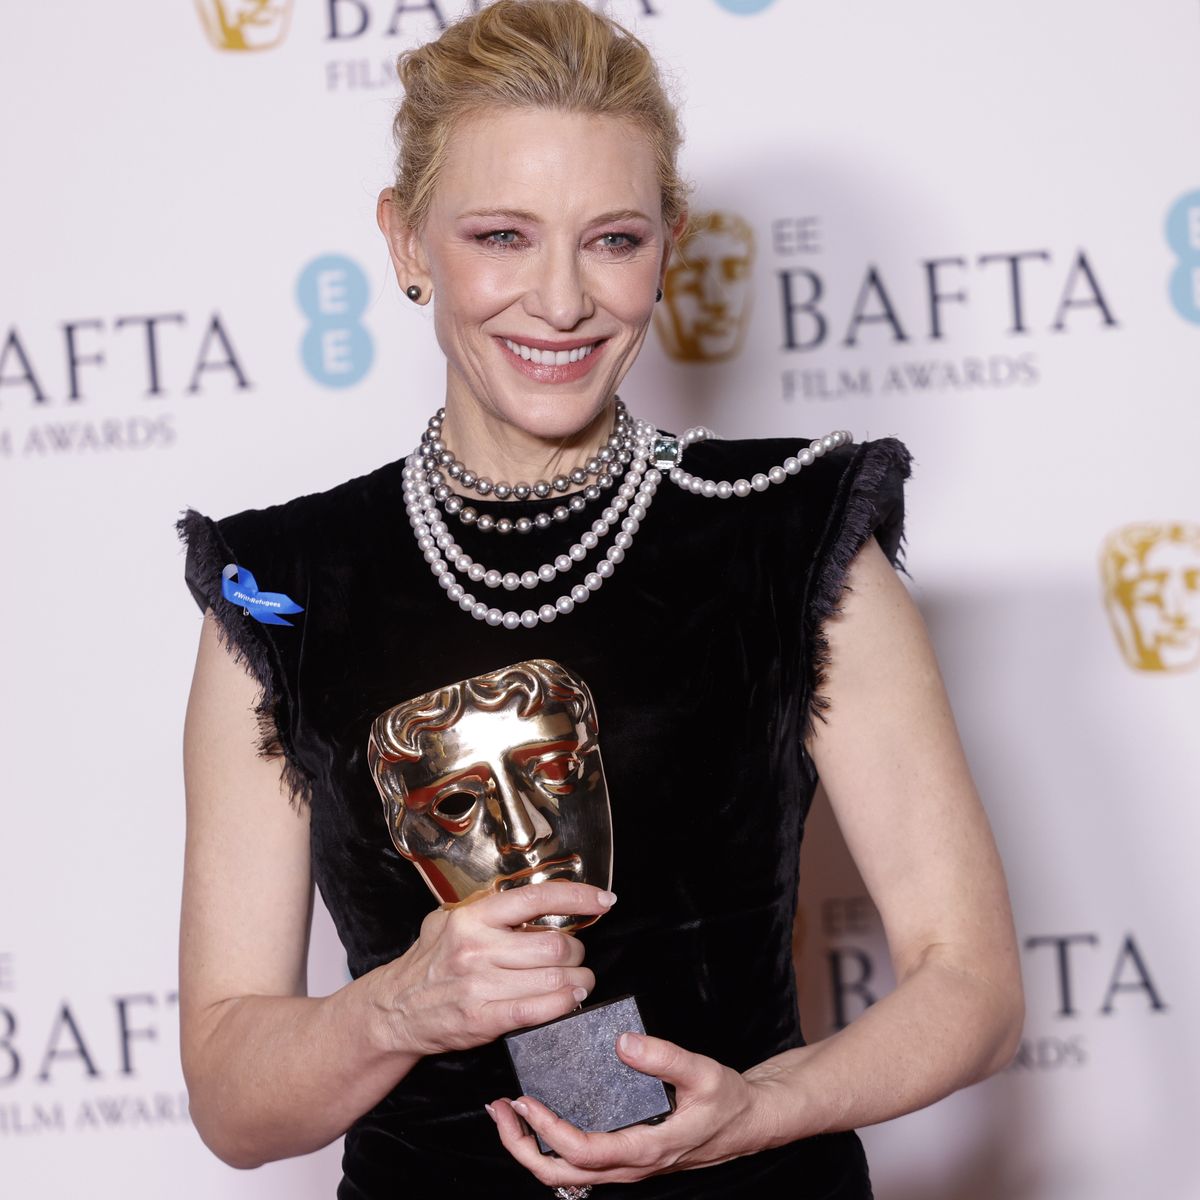 Had a lovely conversation with @bafta and the incomparable